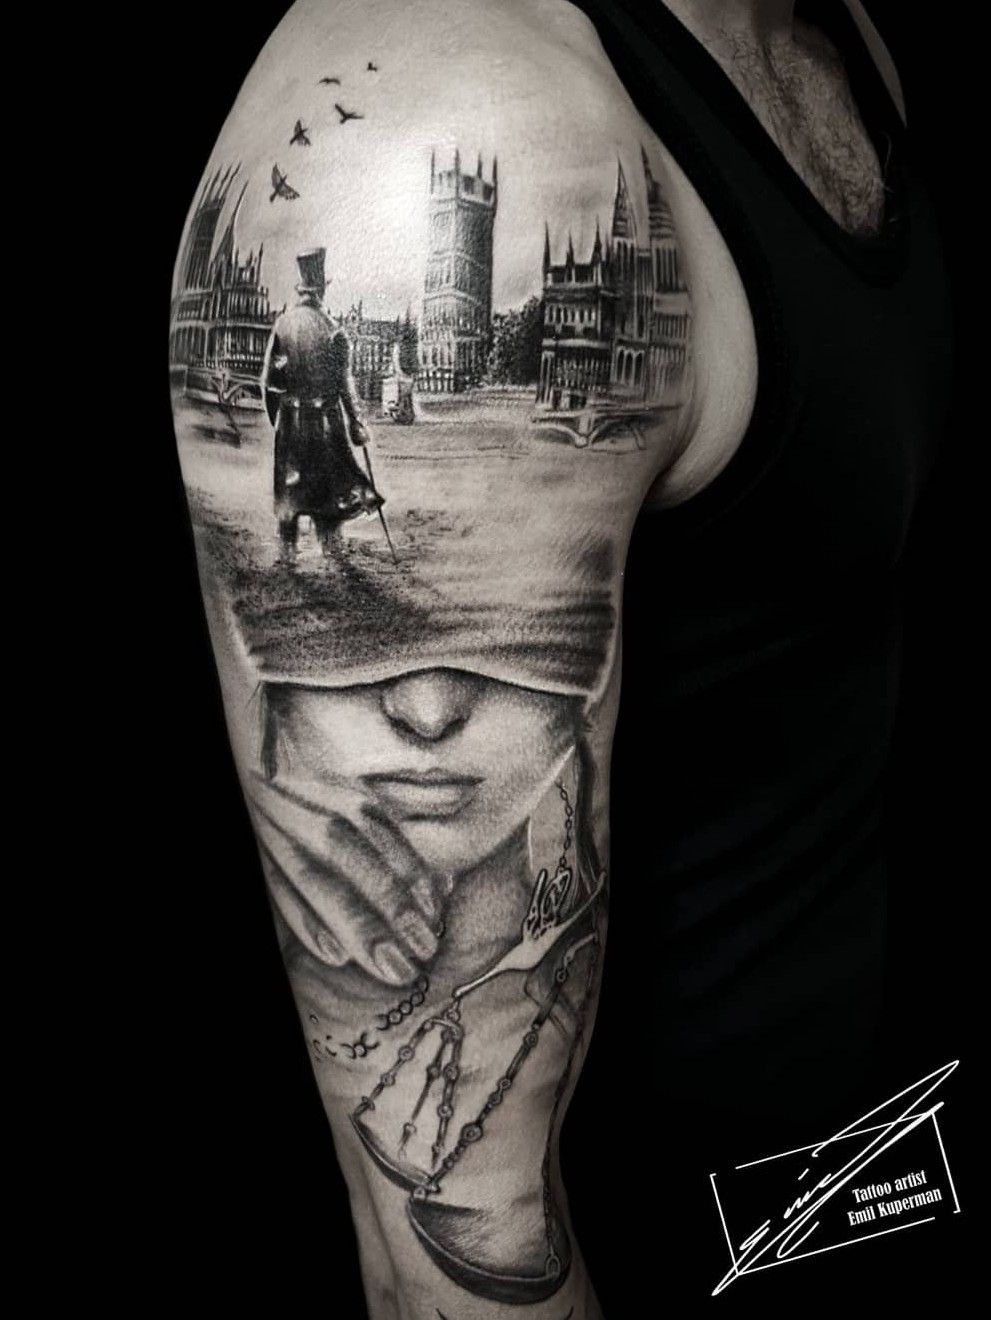 Tattoo uploaded by Scully  Lady justice inner forearm blackandgrey  chicano statue LadyJustice belfast northernireland  Tattoodo